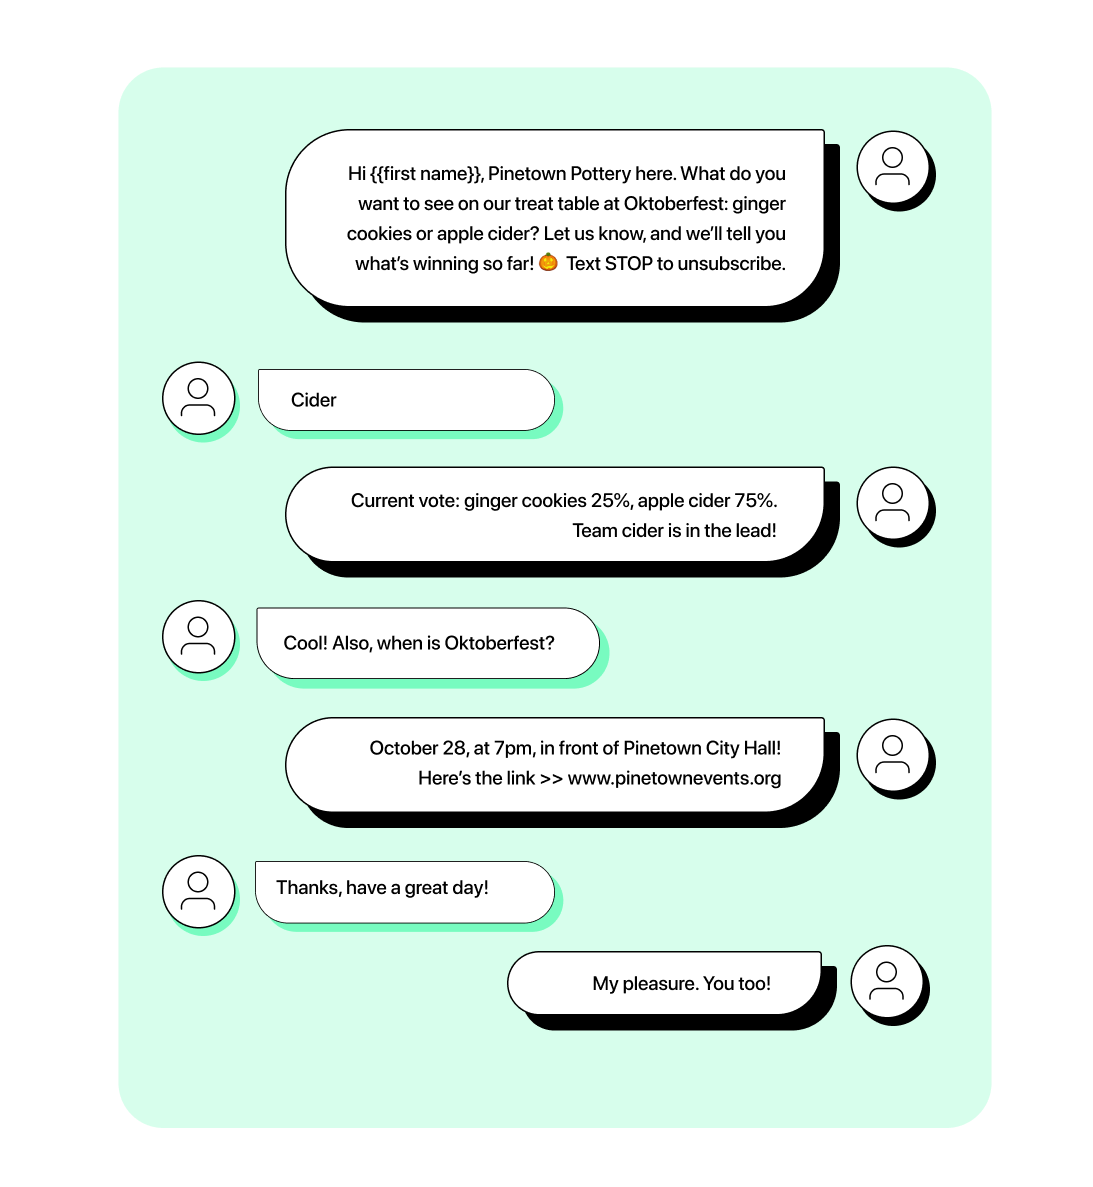 Example of a conversational marketing text converation